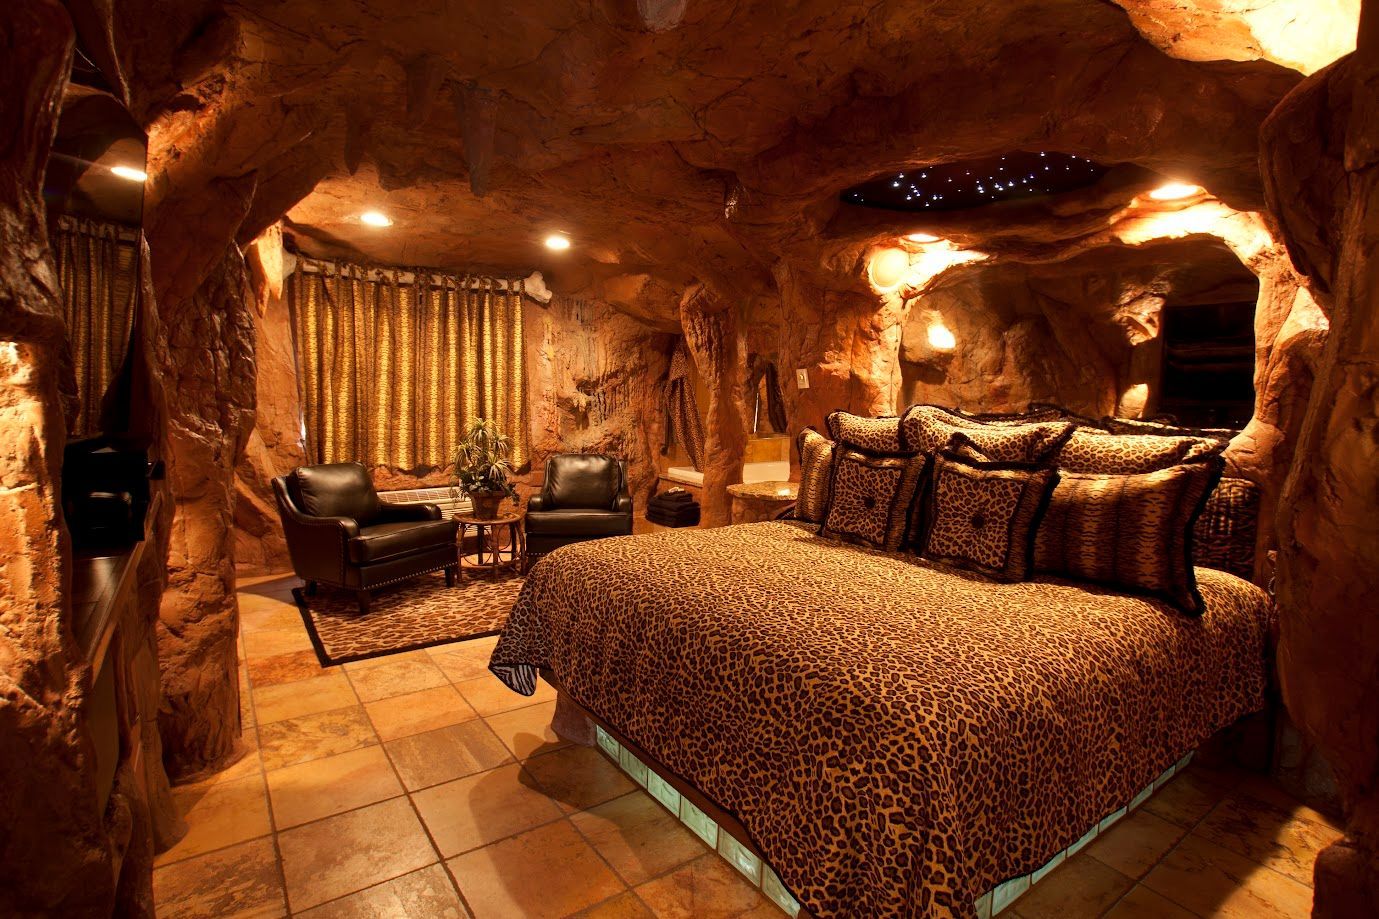 A bedroom in a cave with a leopard print bed